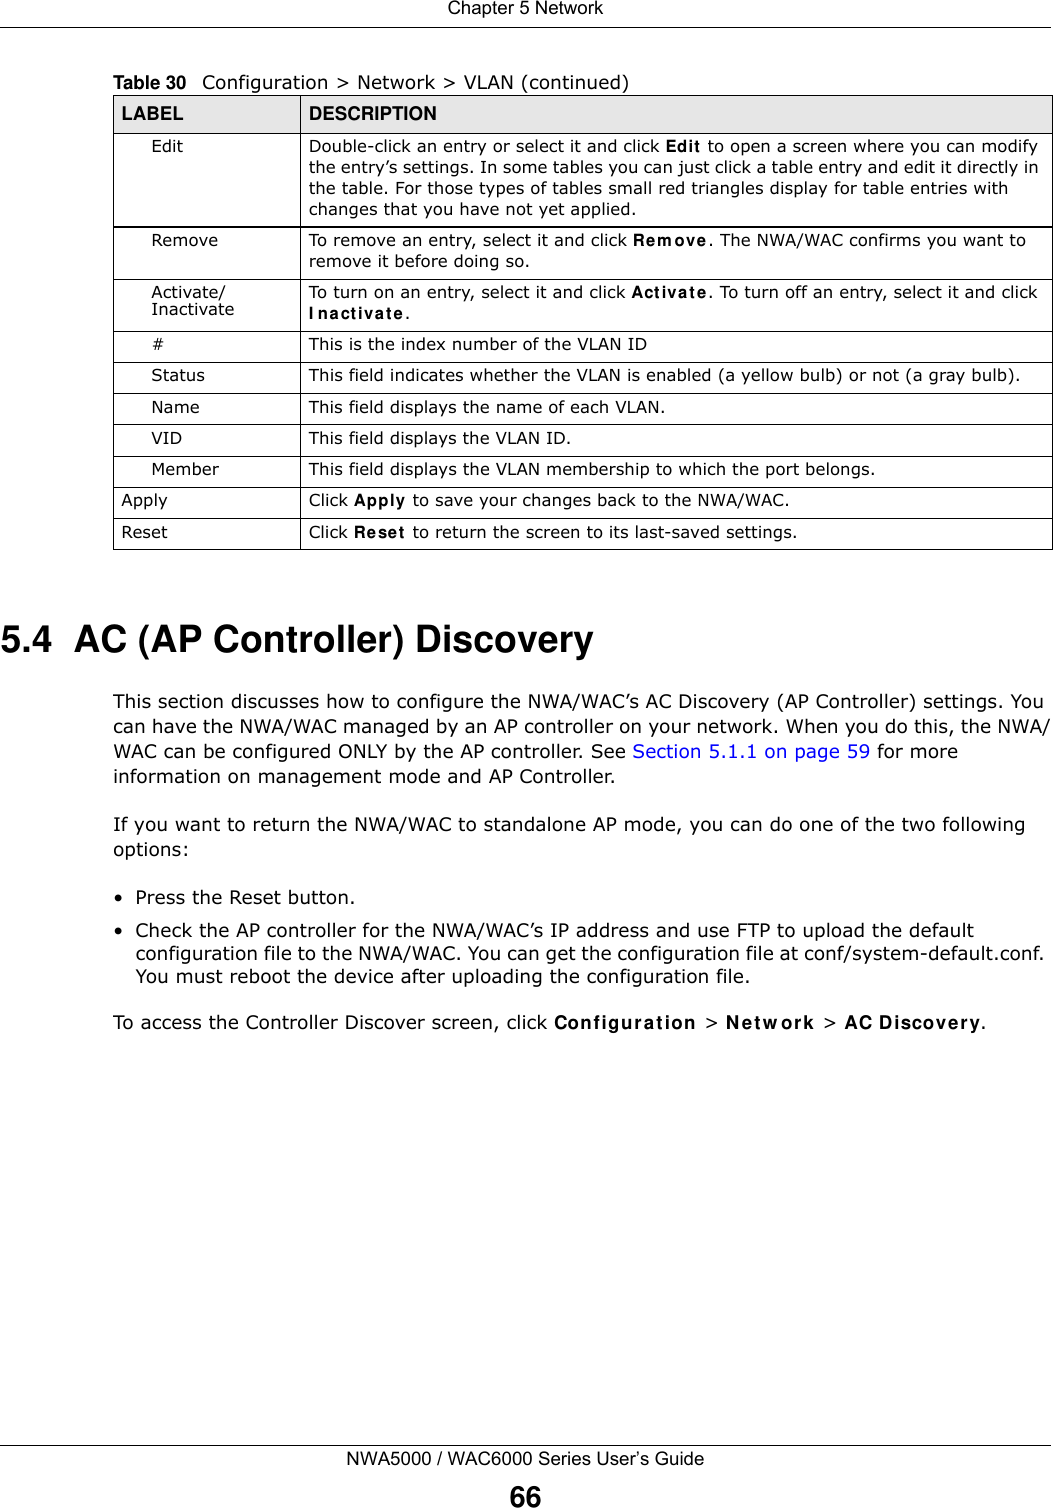 Chapter 5 NetworkNWA5000 / WAC6000 Series User’s Guide665.4  AC (AP Controller) DiscoveryThis section discusses how to configure the NWA/WAC’s AC Discovery (AP Controller) settings. You can have the NWA/WAC managed by an AP controller on your network. When you do this, the NWA/WAC can be configured ONLY by the AP controller. See Section 5.1.1 on page 59 for more information on management mode and AP Controller.If you want to return the NWA/WAC to standalone AP mode, you can do one of the two following options: • Press the Reset button.• Check the AP controller for the NWA/WAC’s IP address and use FTP to upload the default configuration file to the NWA/WAC. You can get the configuration file at conf/system-default.conf. You must reboot the device after uploading the configuration file. To access the Controller Discover screen, click Configuration &gt; Network &gt; AC Discovery.Edit Double-click an entry or select it and click Edit to open a screen where you can modify the entry’s settings. In some tables you can just click a table entry and edit it directly in the table. For those types of tables small red triangles display for table entries with changes that you have not yet applied.Remove To remove an entry, select it and click Remove. The NWA/WAC confirms you want to remove it before doing so.Activate/Inactivate To turn on an entry, select it and click Activate. To turn off an entry, select it and click Inactivate.# This is the index number of the VLAN ID Status This field indicates whether the VLAN is enabled (a yellow bulb) or not (a gray bulb).Name This field displays the name of each VLAN.VID This field displays the VLAN ID.Member This field displays the VLAN membership to which the port belongs.Apply Click Apply to save your changes back to the NWA/WAC.Reset Click Reset to return the screen to its last-saved settings. Table 30   Configuration &gt; Network &gt; VLAN (continued)LABEL  DESCRIPTION